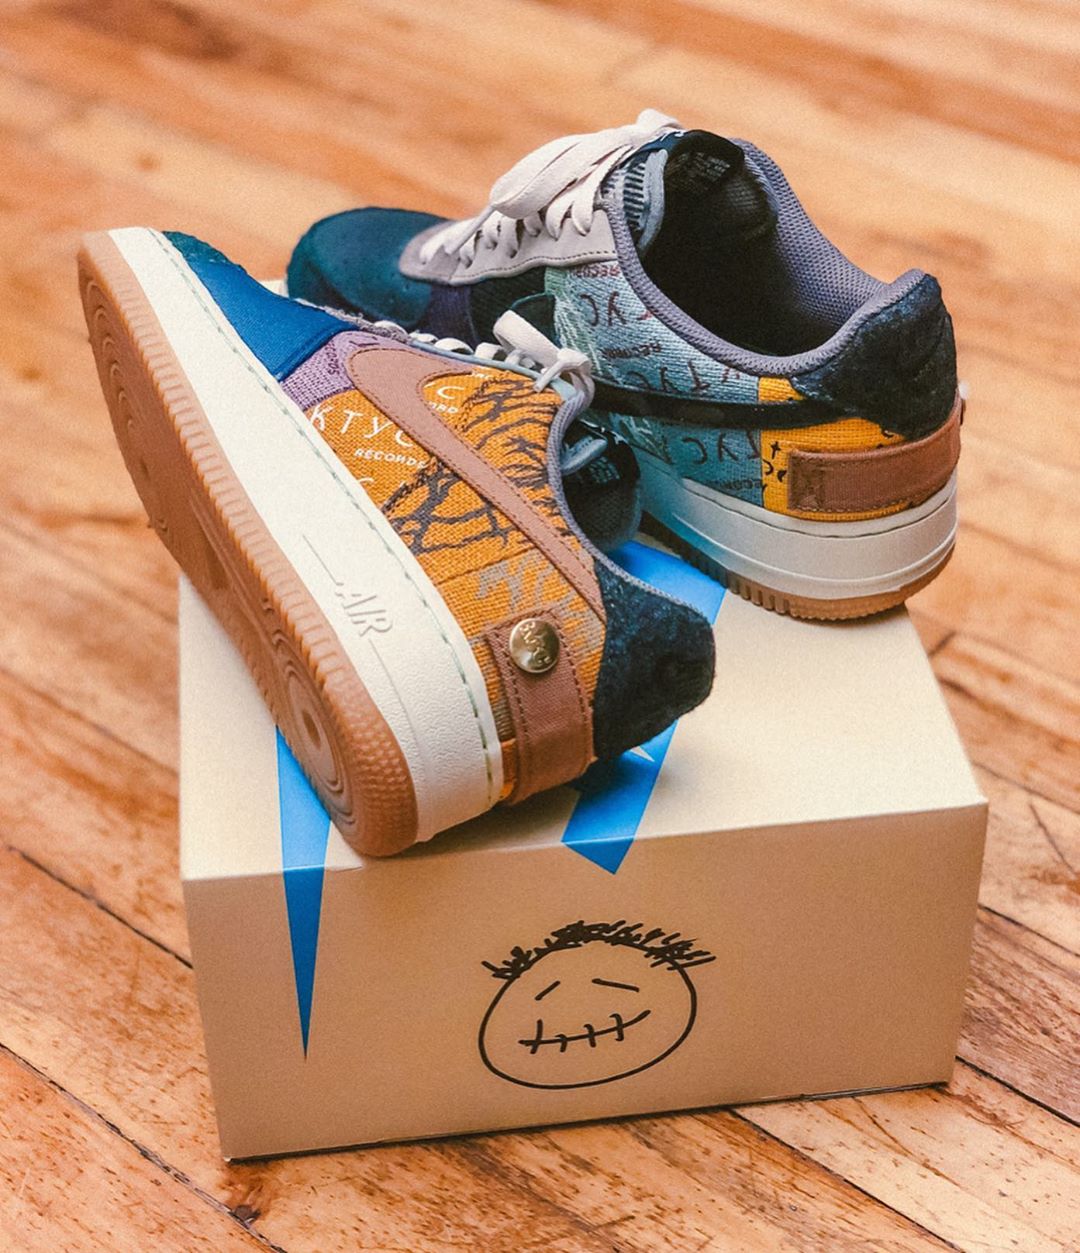 Special Shoe Box for Travis Scott x Nike Air Force 1 